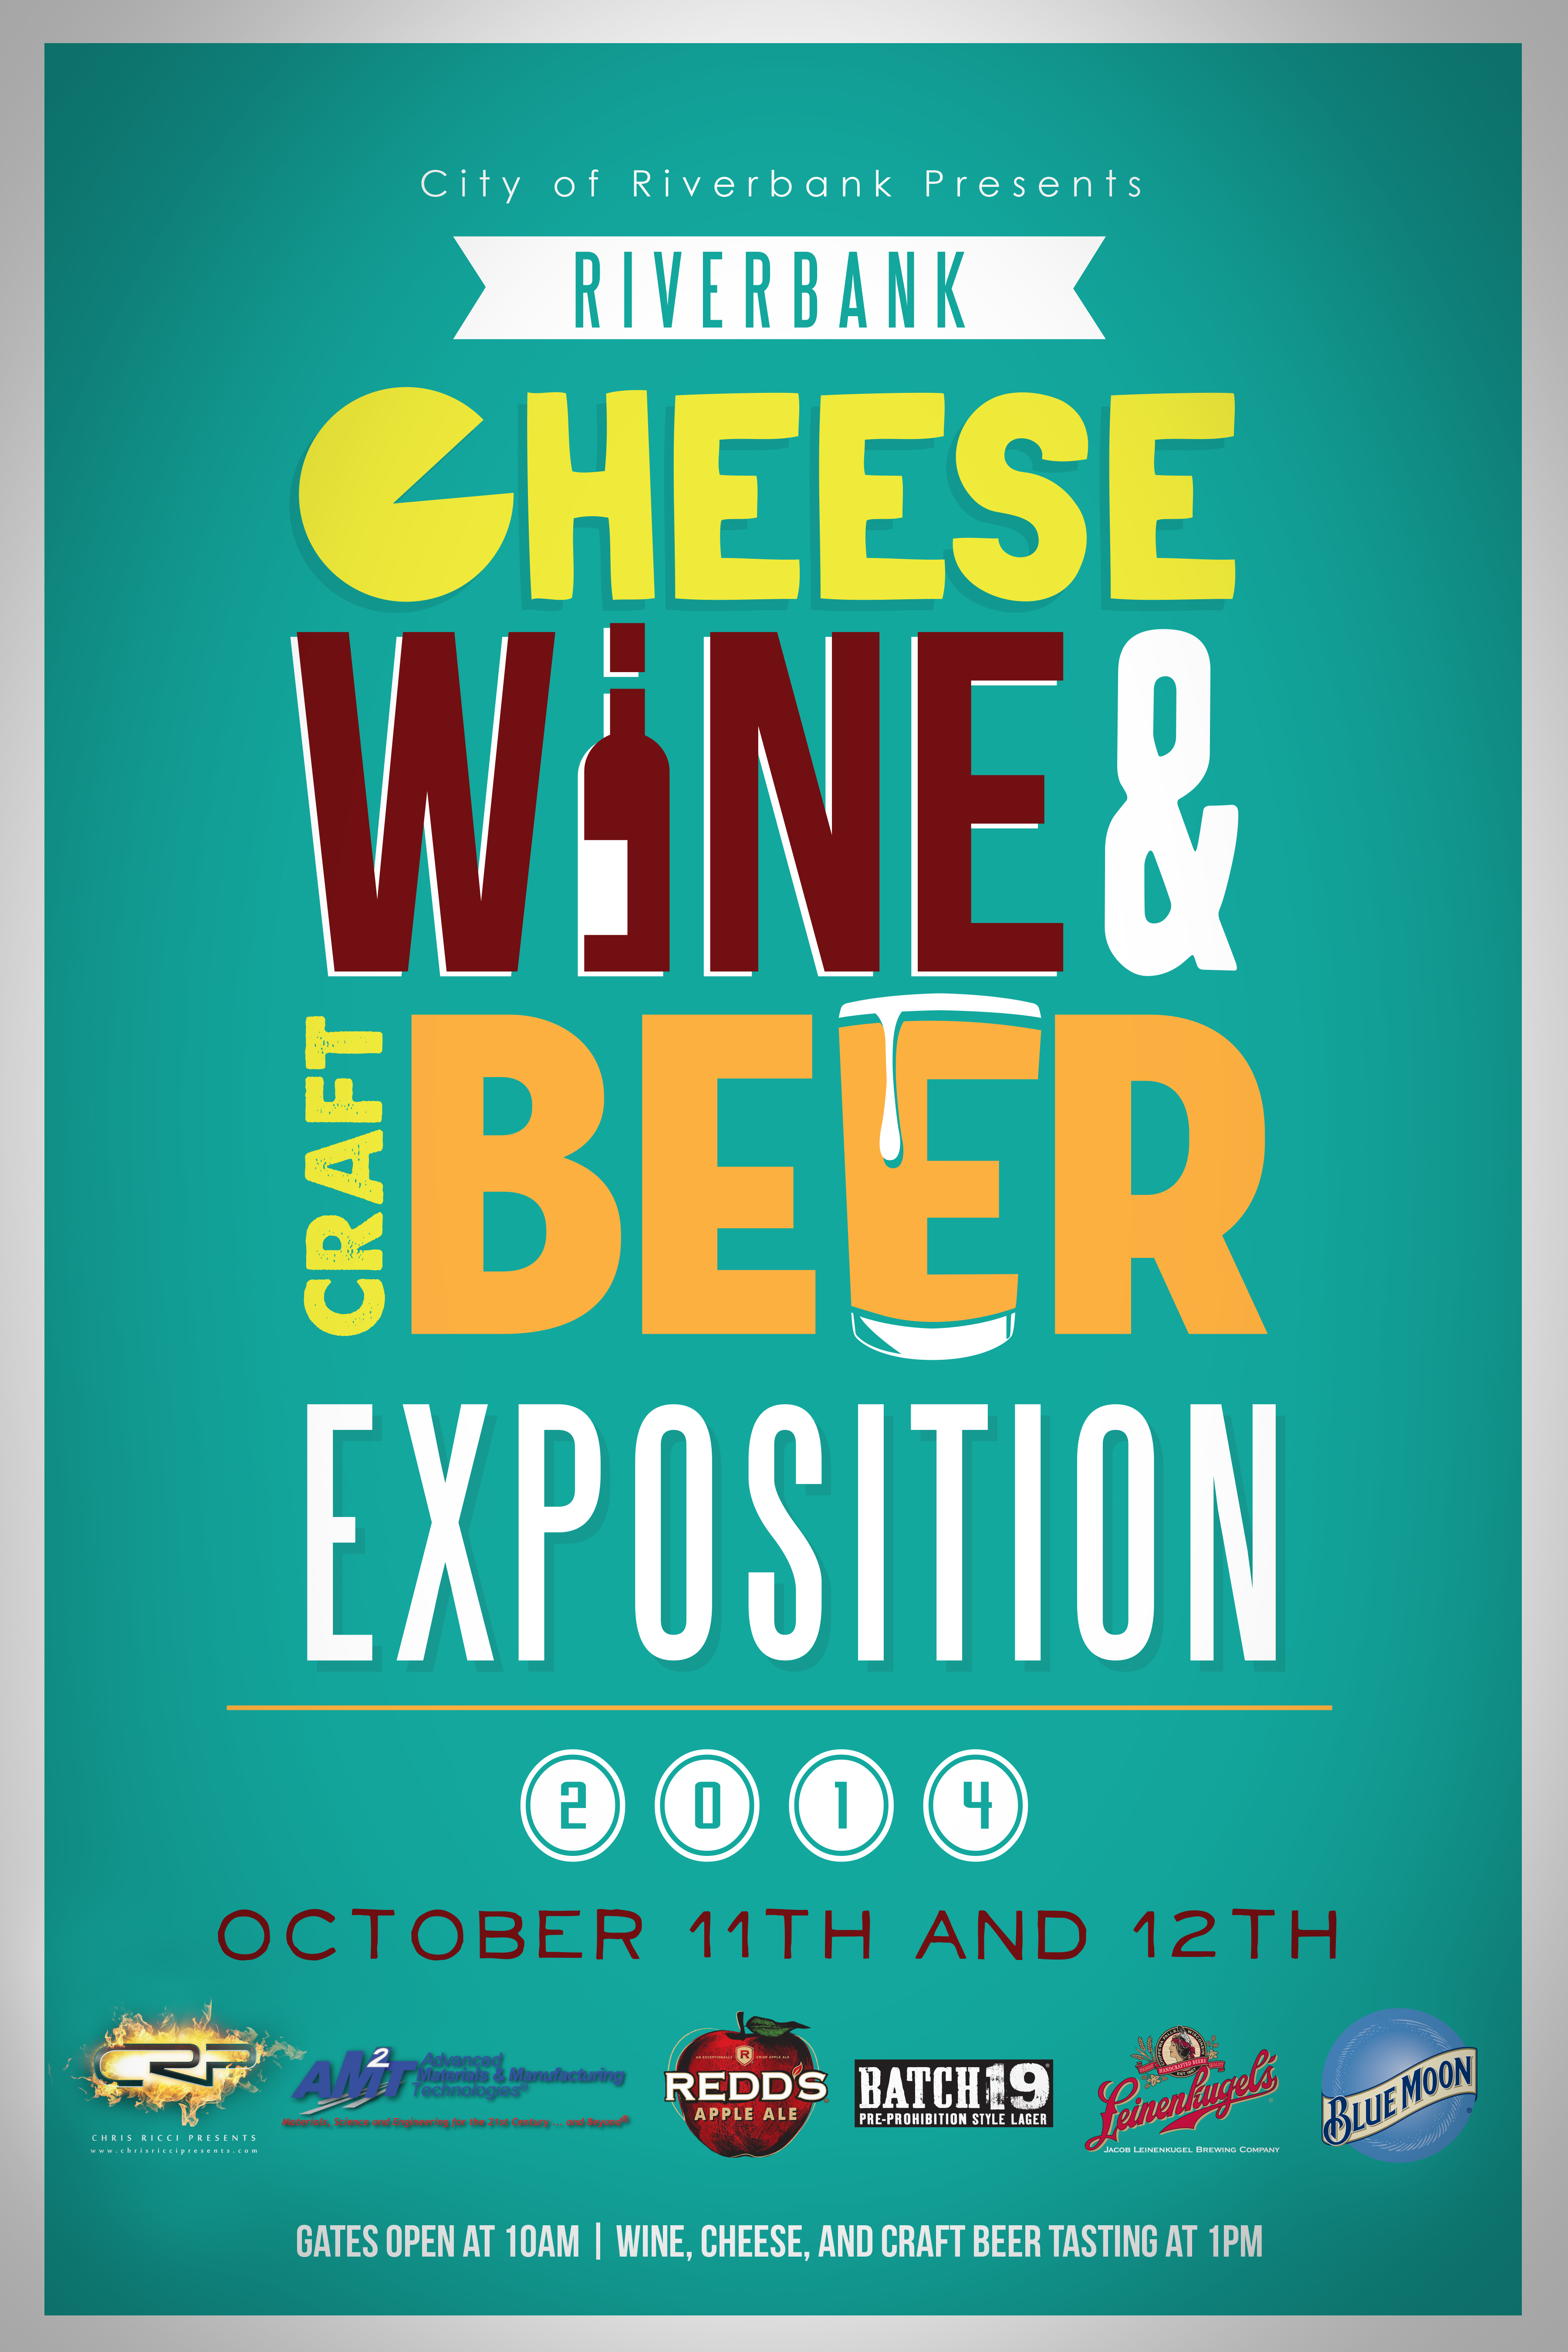 Buy Tickets to Riverbank Cheese and Wine Expo in Riverbank